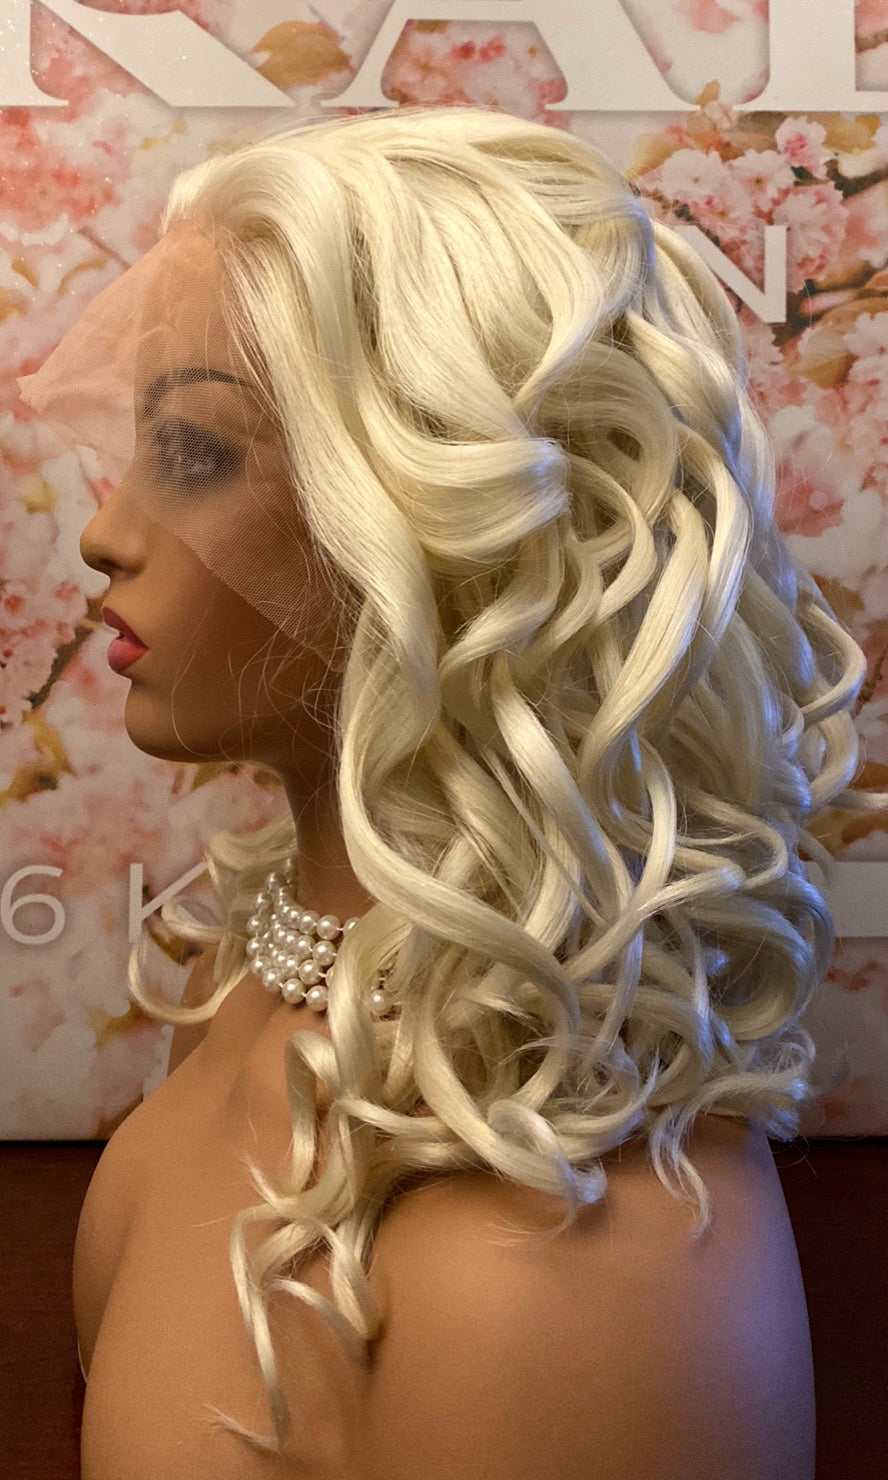 PREMIUM CURLY ICY PLATINUM BLONDE HUMAN HAIR BLEND LACEFRONT WIG